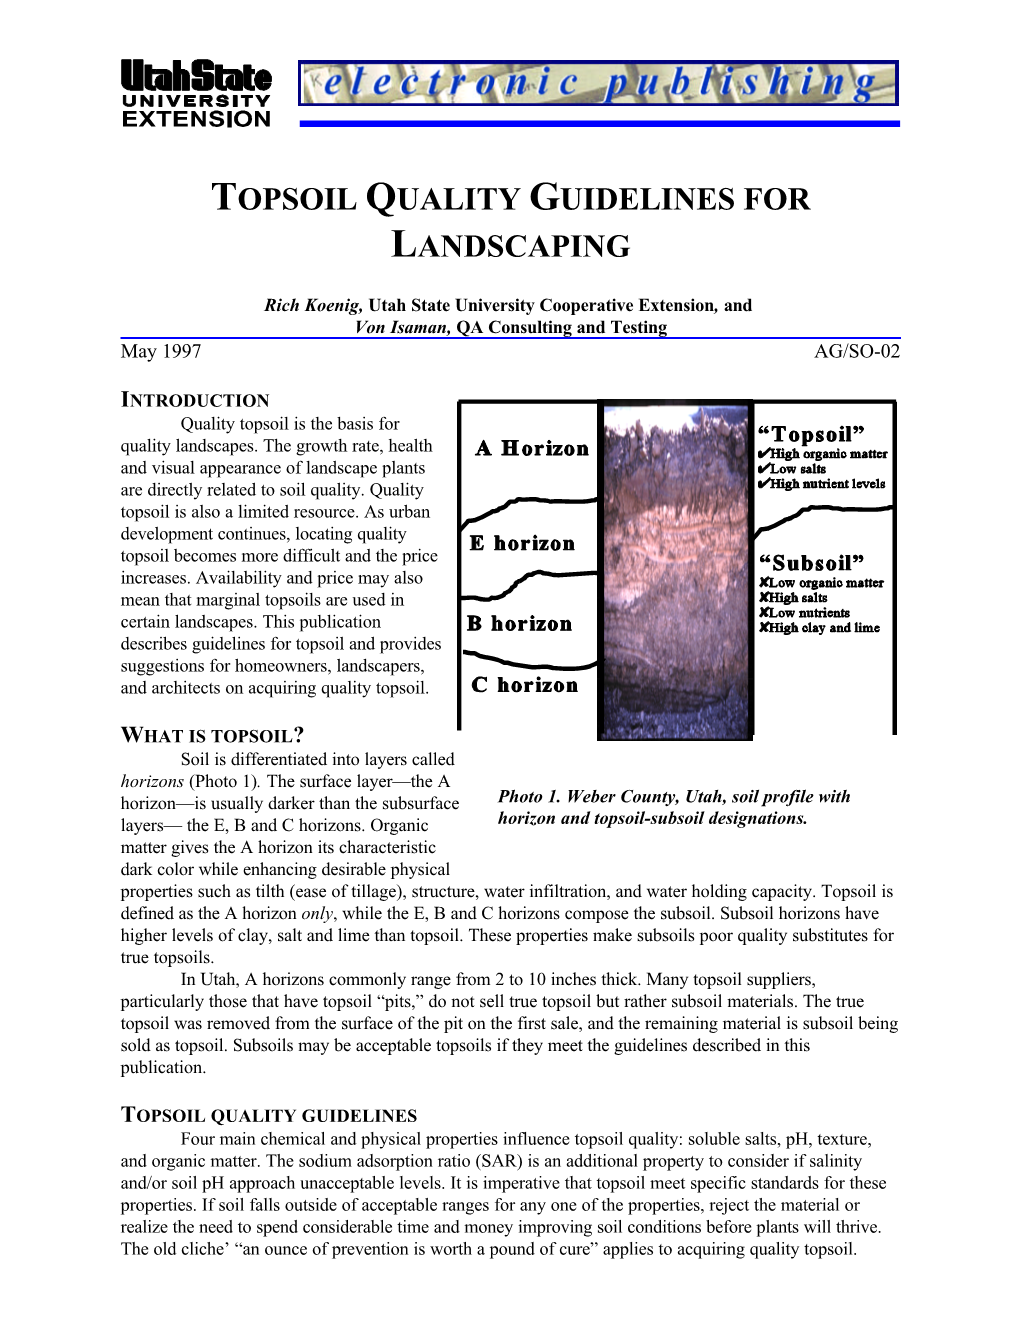 Topsoil Quality Guidelines for Landscaping